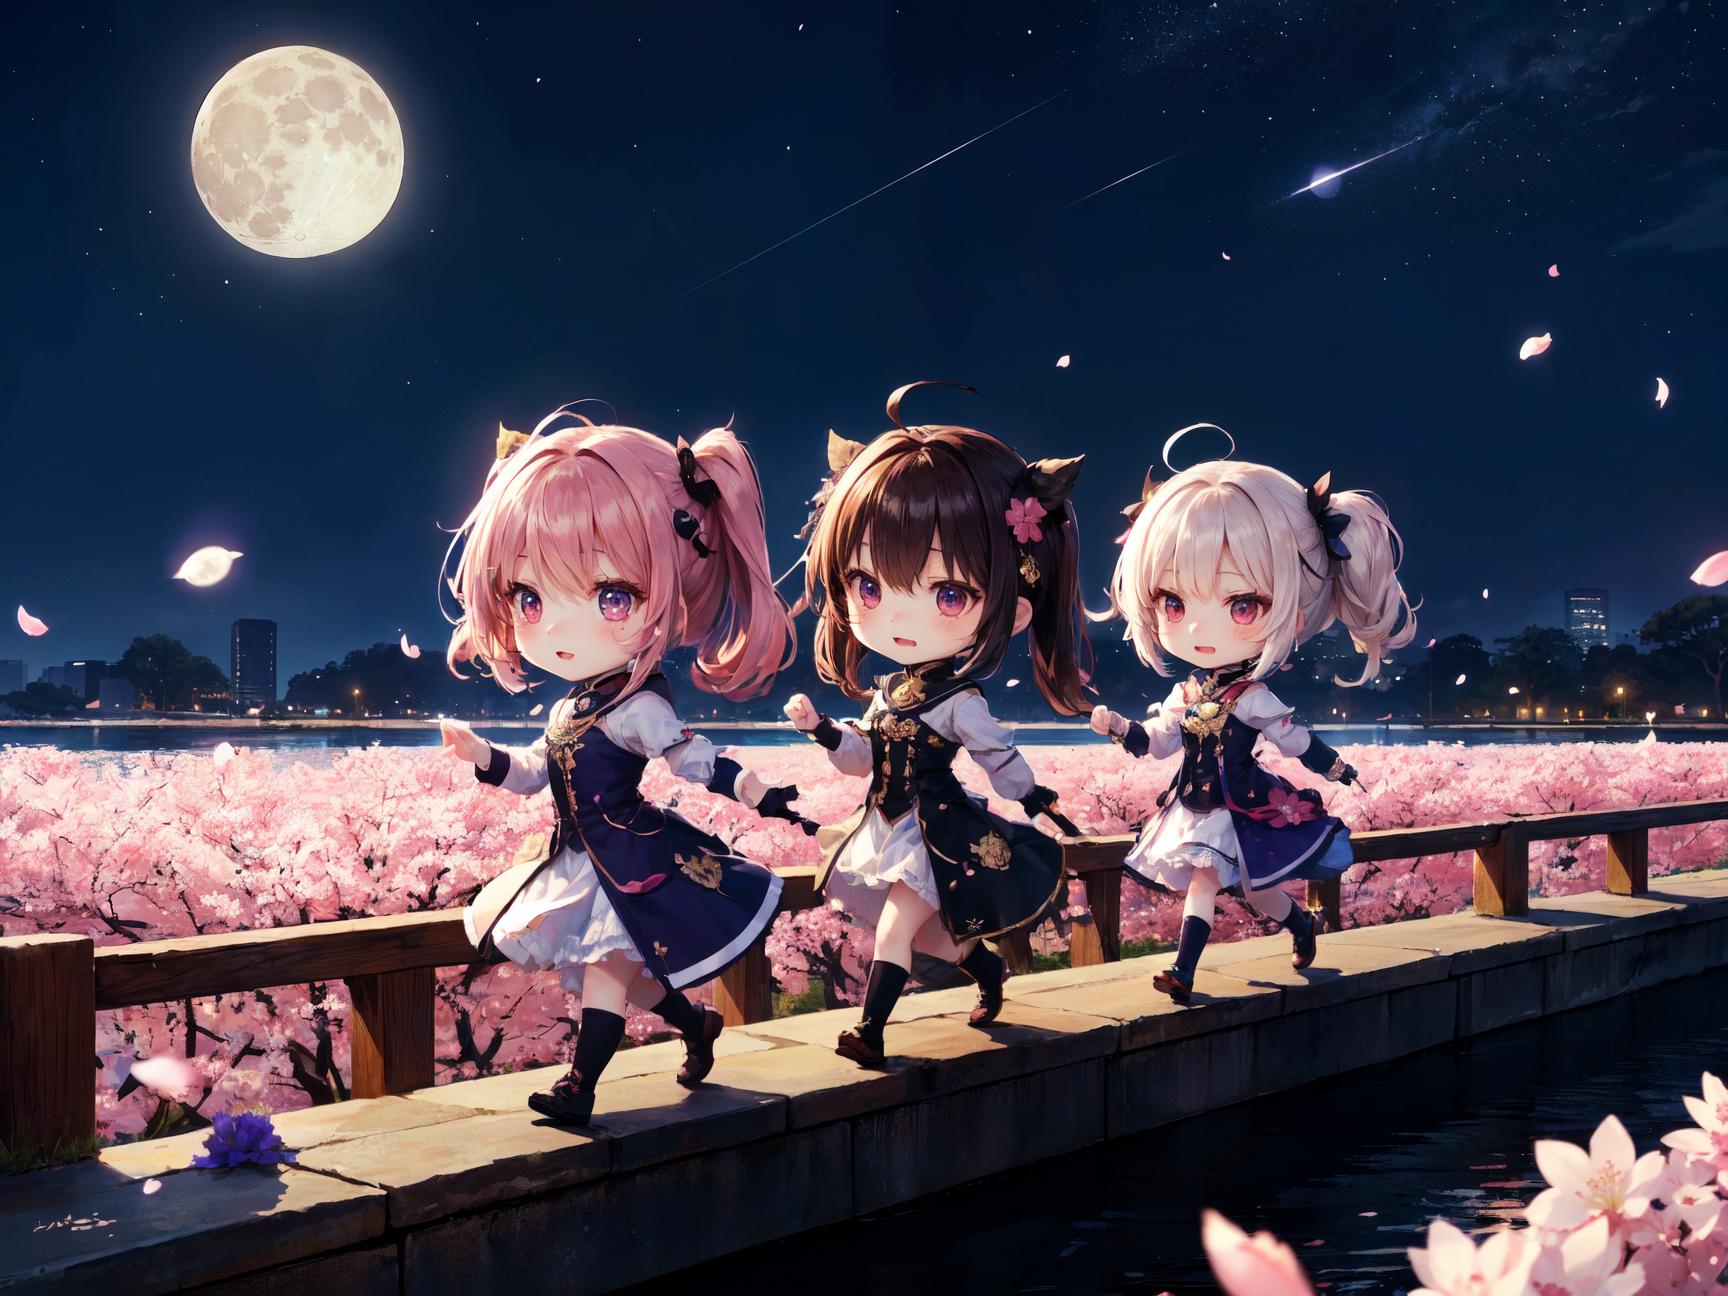 Anime-style scene of four girls walking along a pier at night.